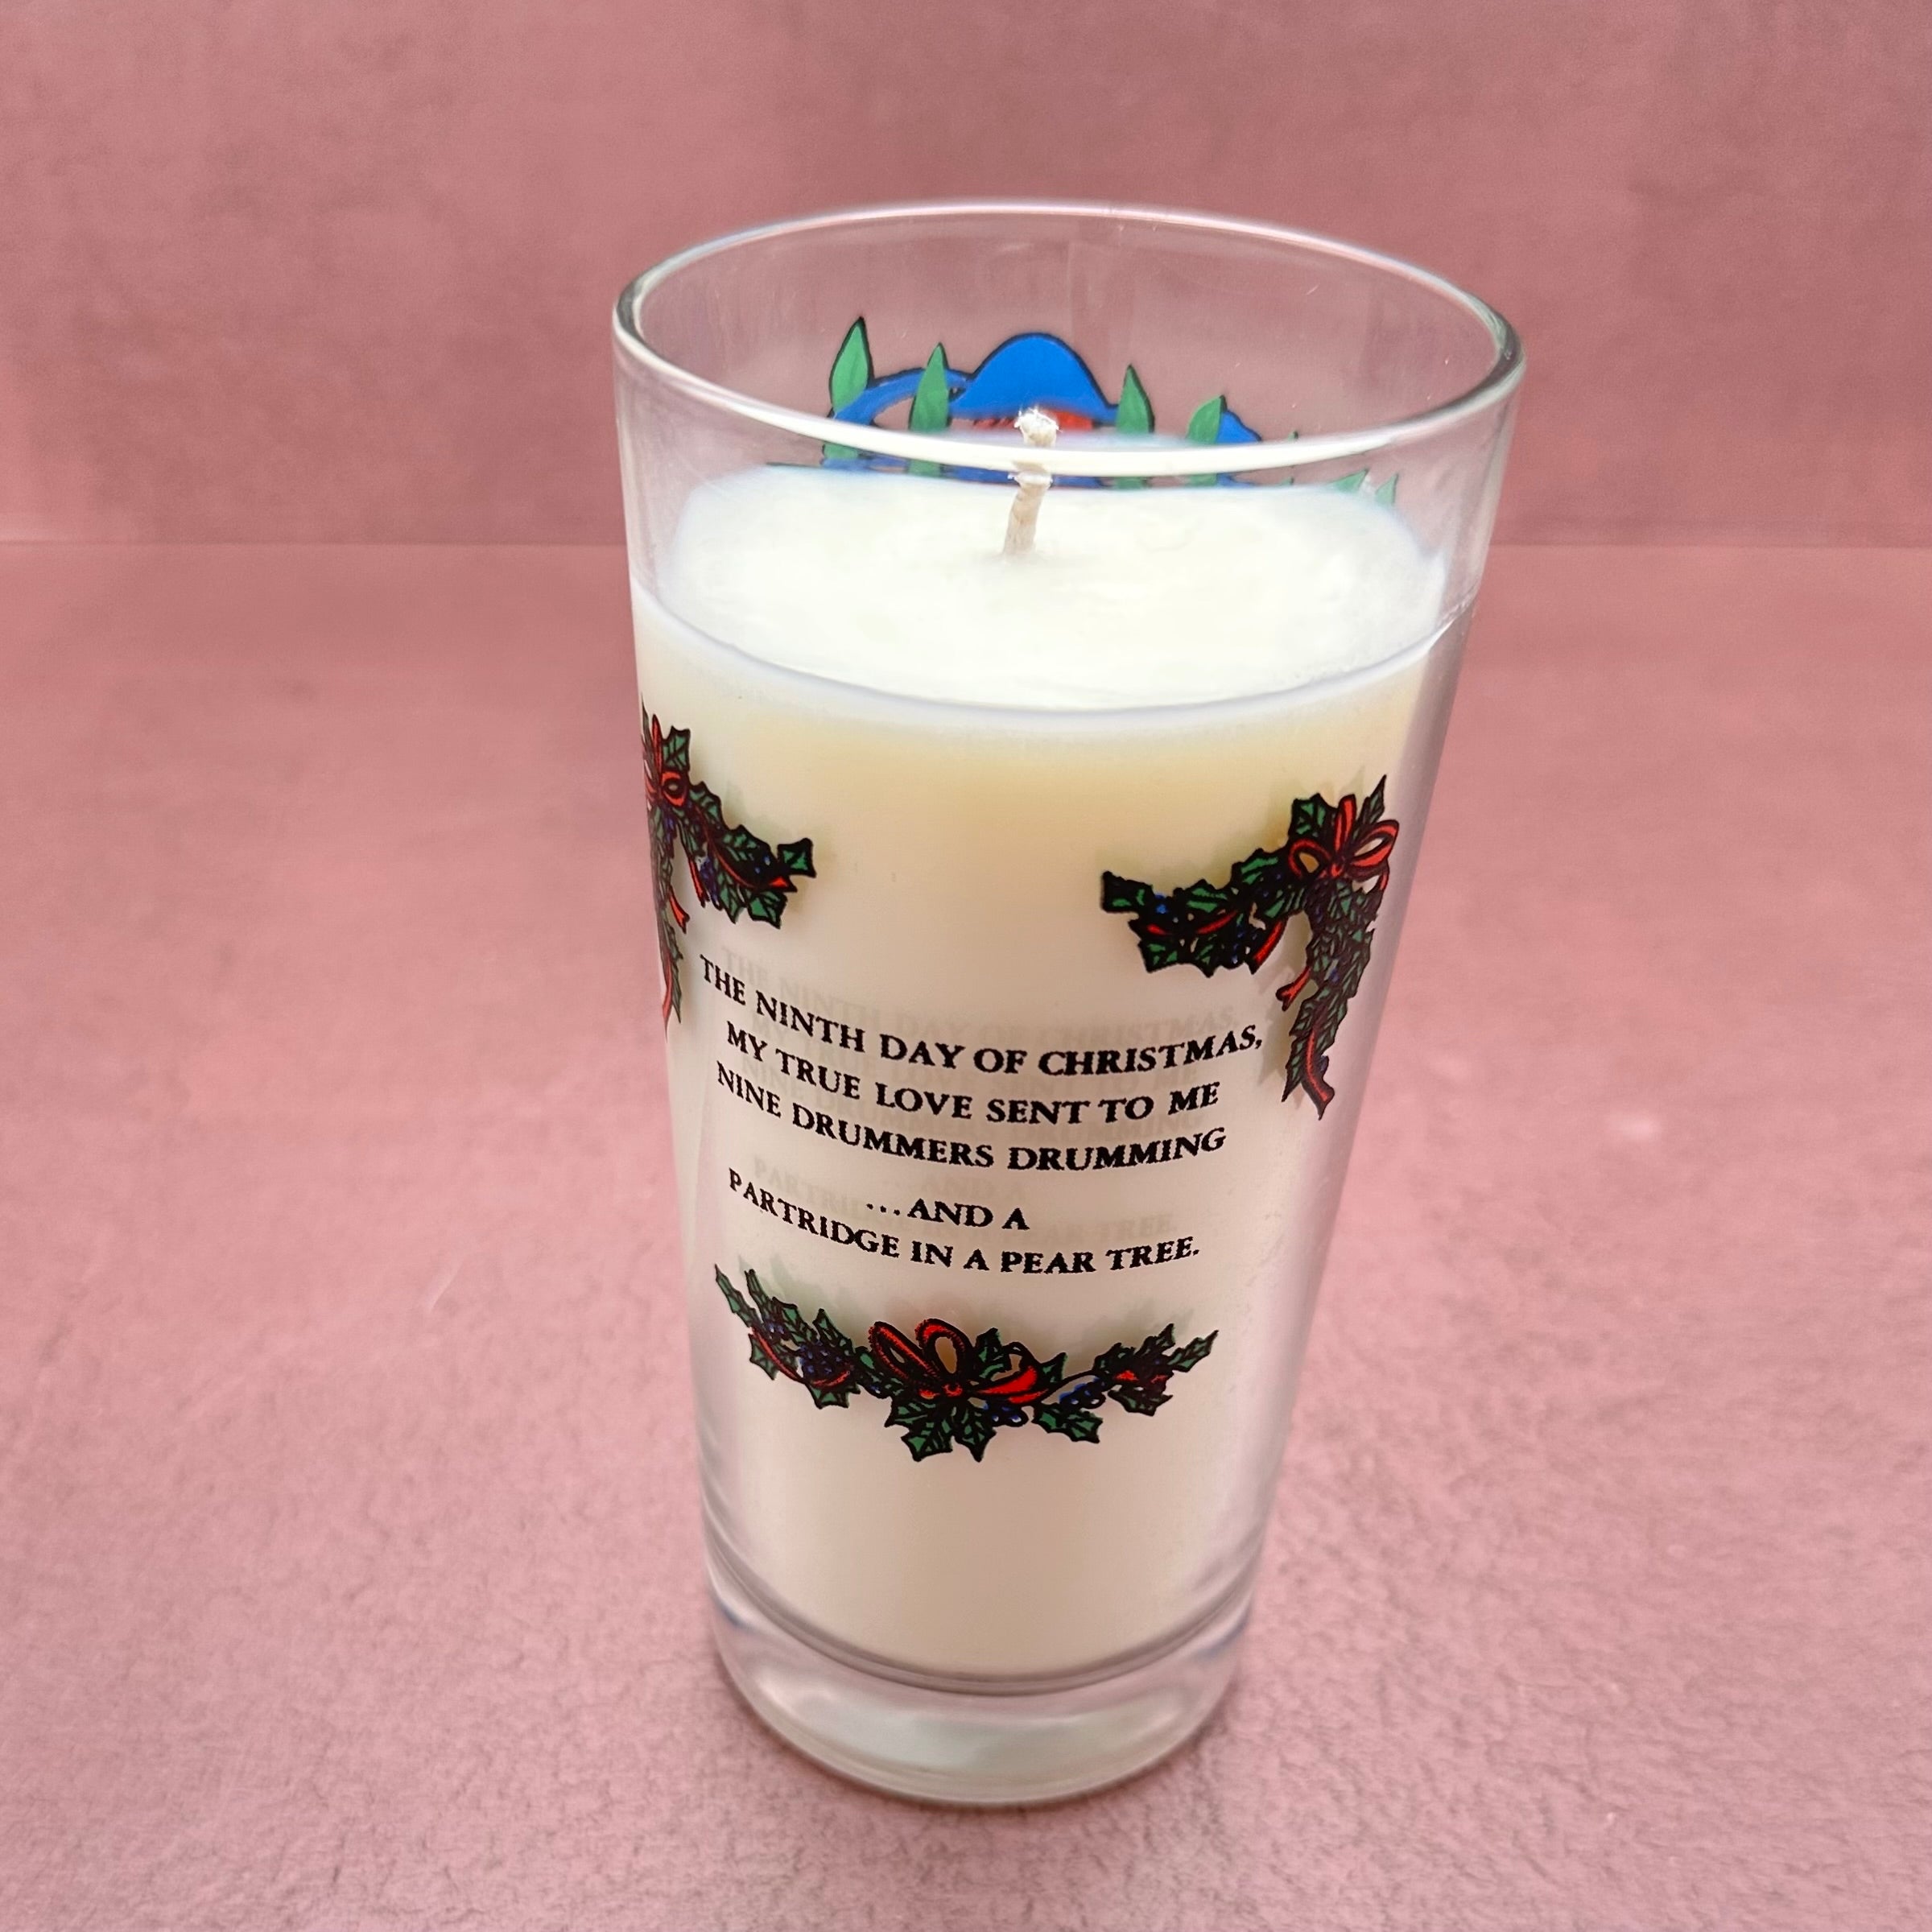 Vintage Days of Christmas Candles